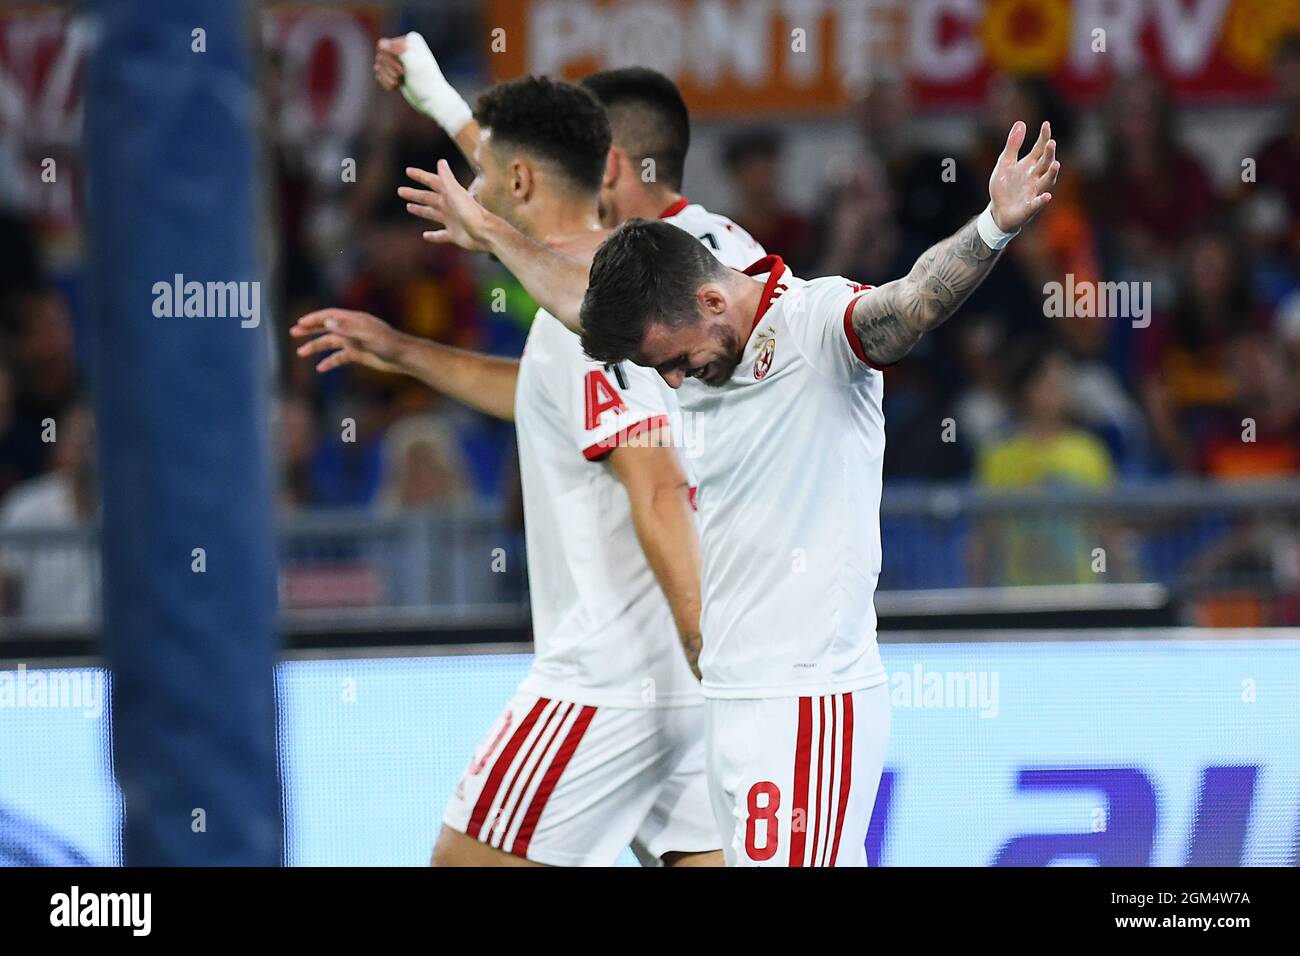 16th September 2021: Stadio Olimpico, Rome, Italy; Graham Carey of CSKA Sofia celebrate after scoring the goal during the Conference League match between AS Roma versus CSKA Sofia at Olimpico stadium Stock Photo